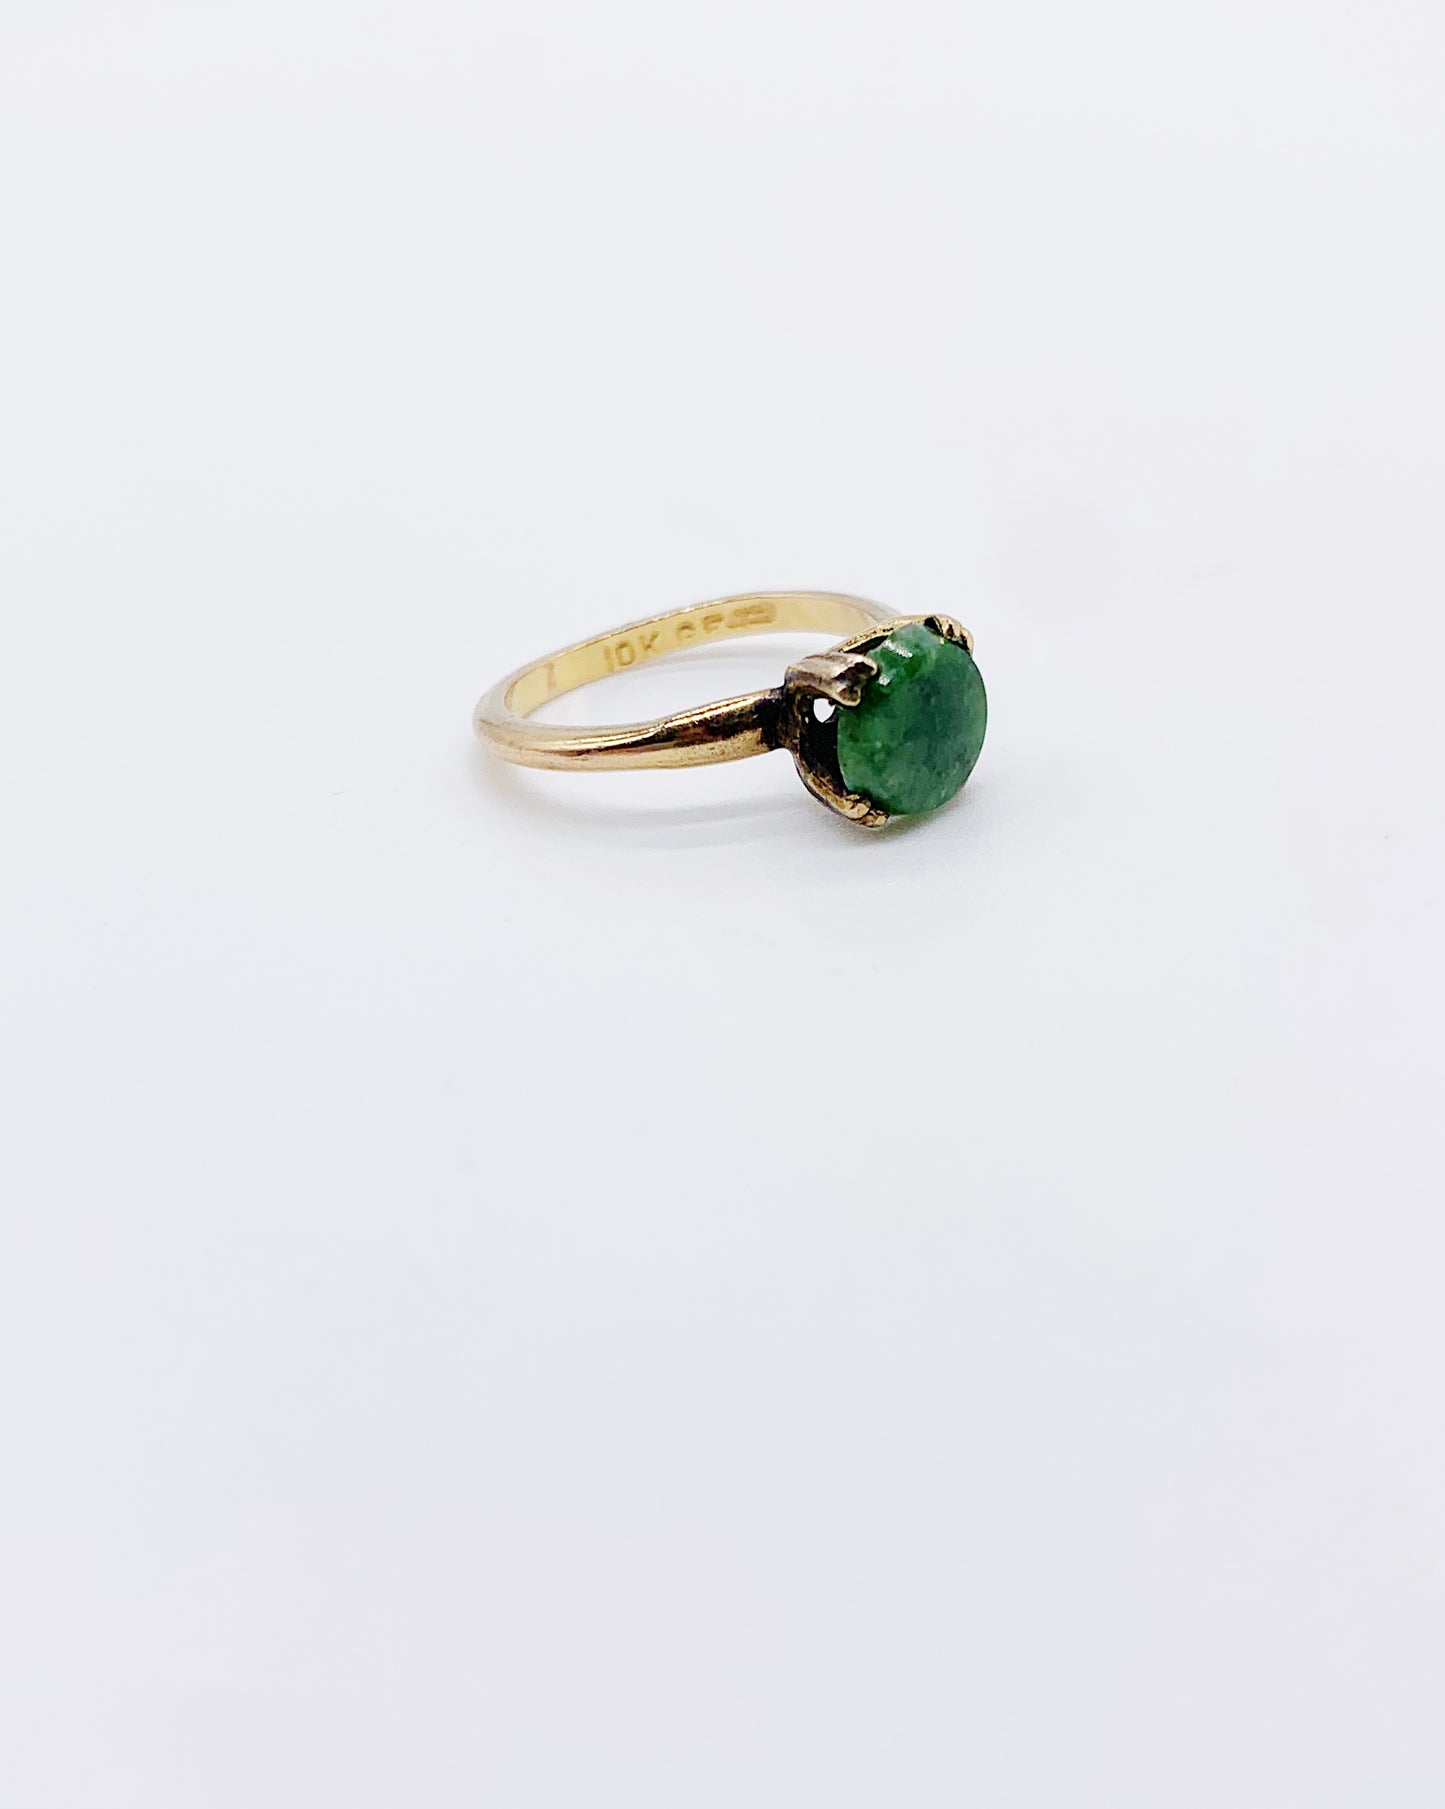 JADE GOLD SOLITAIRE RING